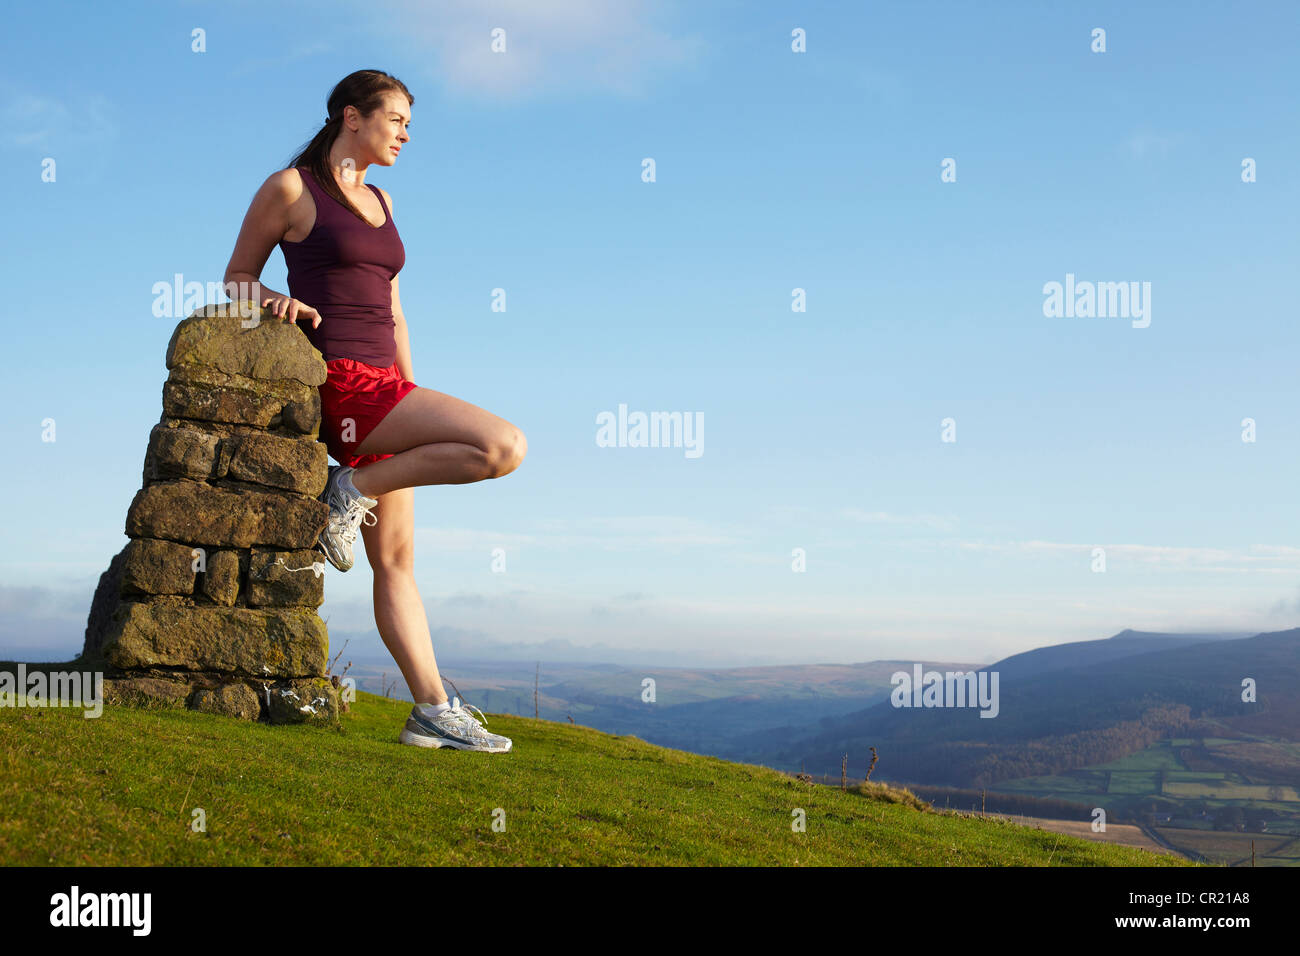 Runner leaning against rock wall Stock Photo